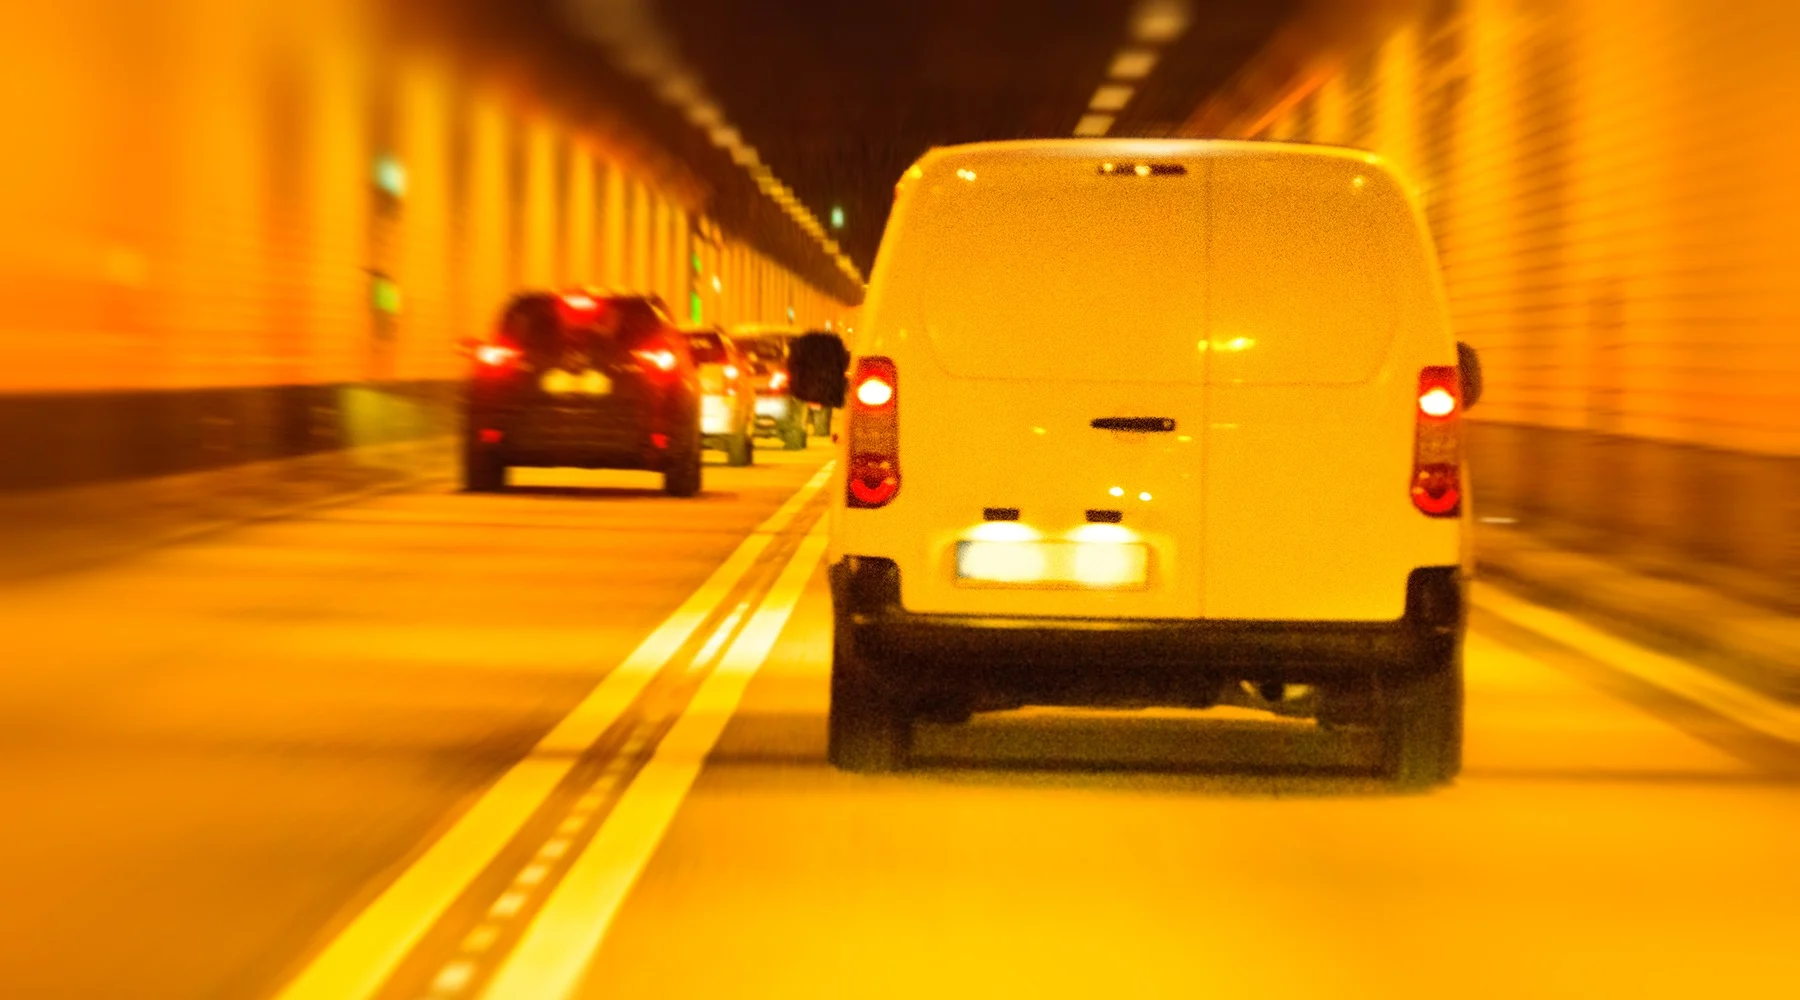 Van from back driving away, lit by orange light in tunnel